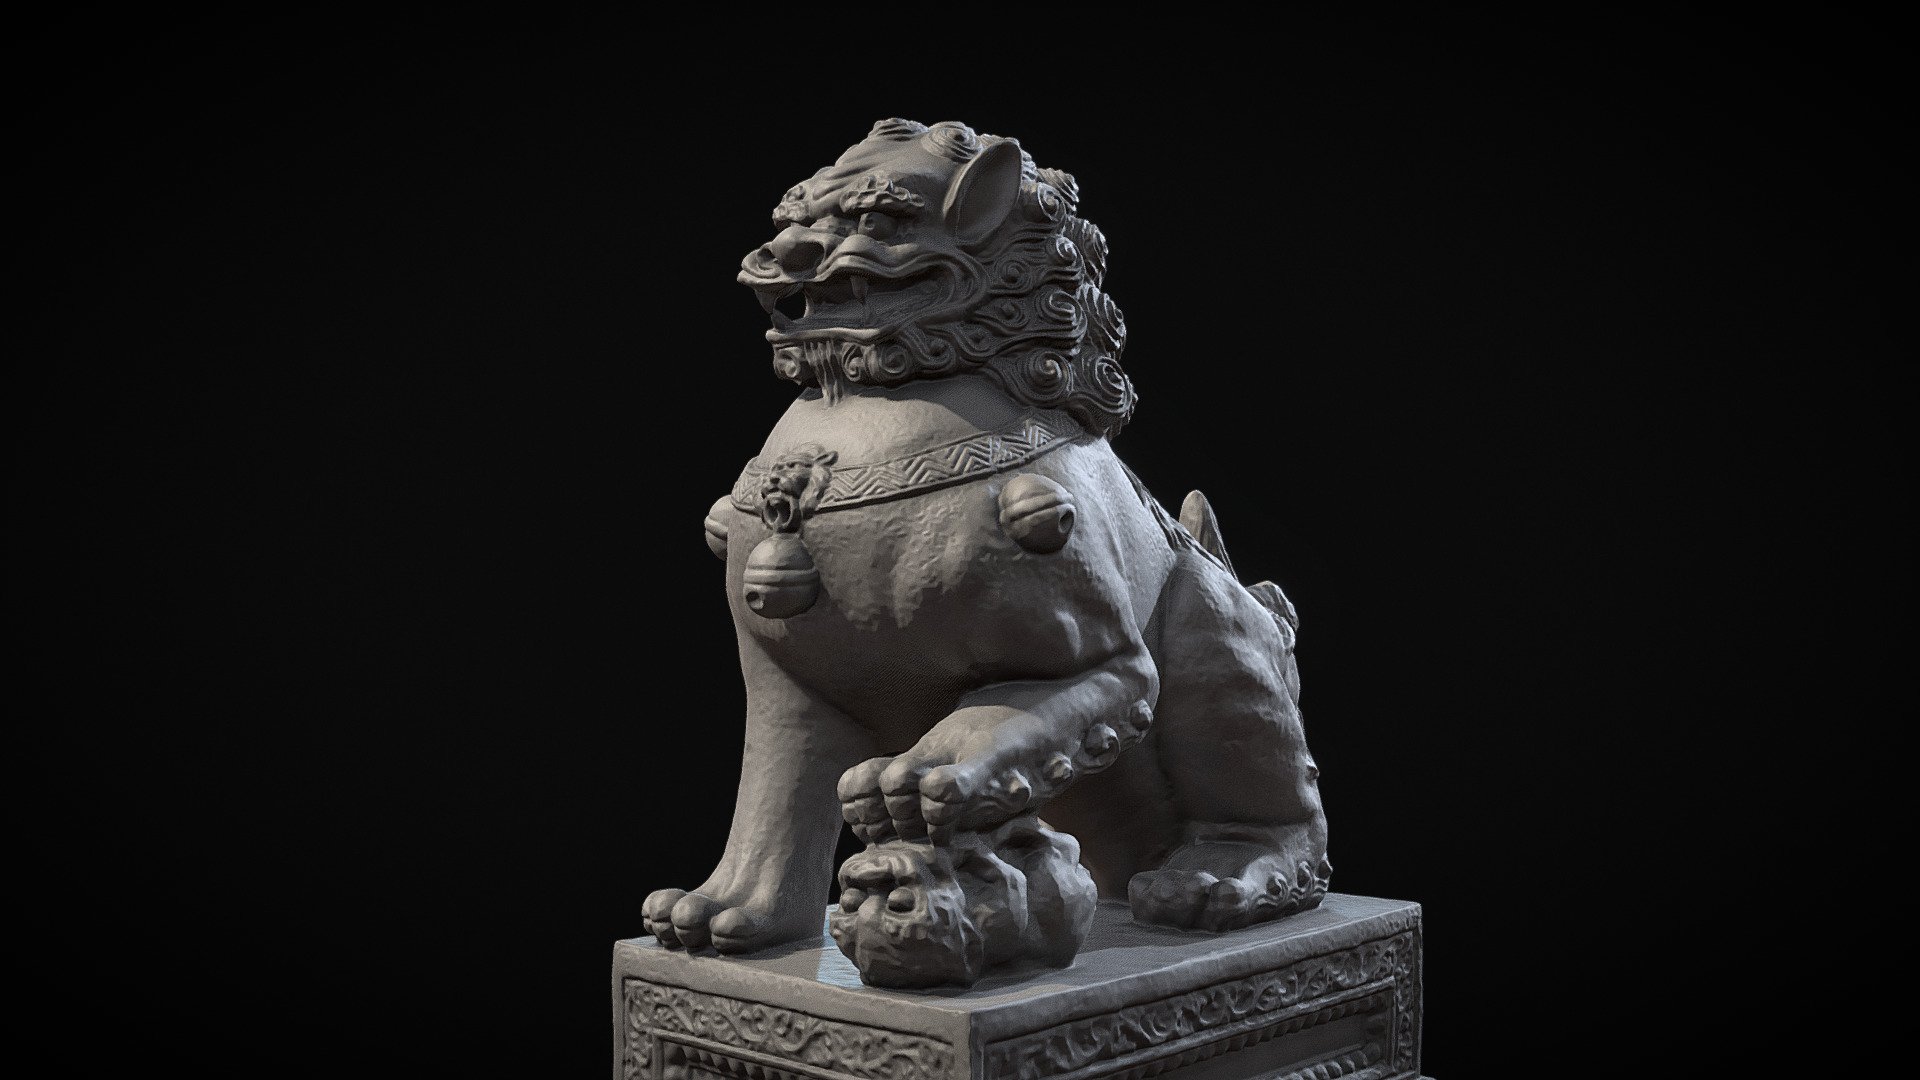 A traditional Chinese architectural ornament, but the origins lie deep in much older Indian Buddhist traditions.

3 versions: with cuts in joints

highpoly details enhanced.

Let me know if you have any requests.

Enjoy!

PS: Base model: &ldquo;Lion statue